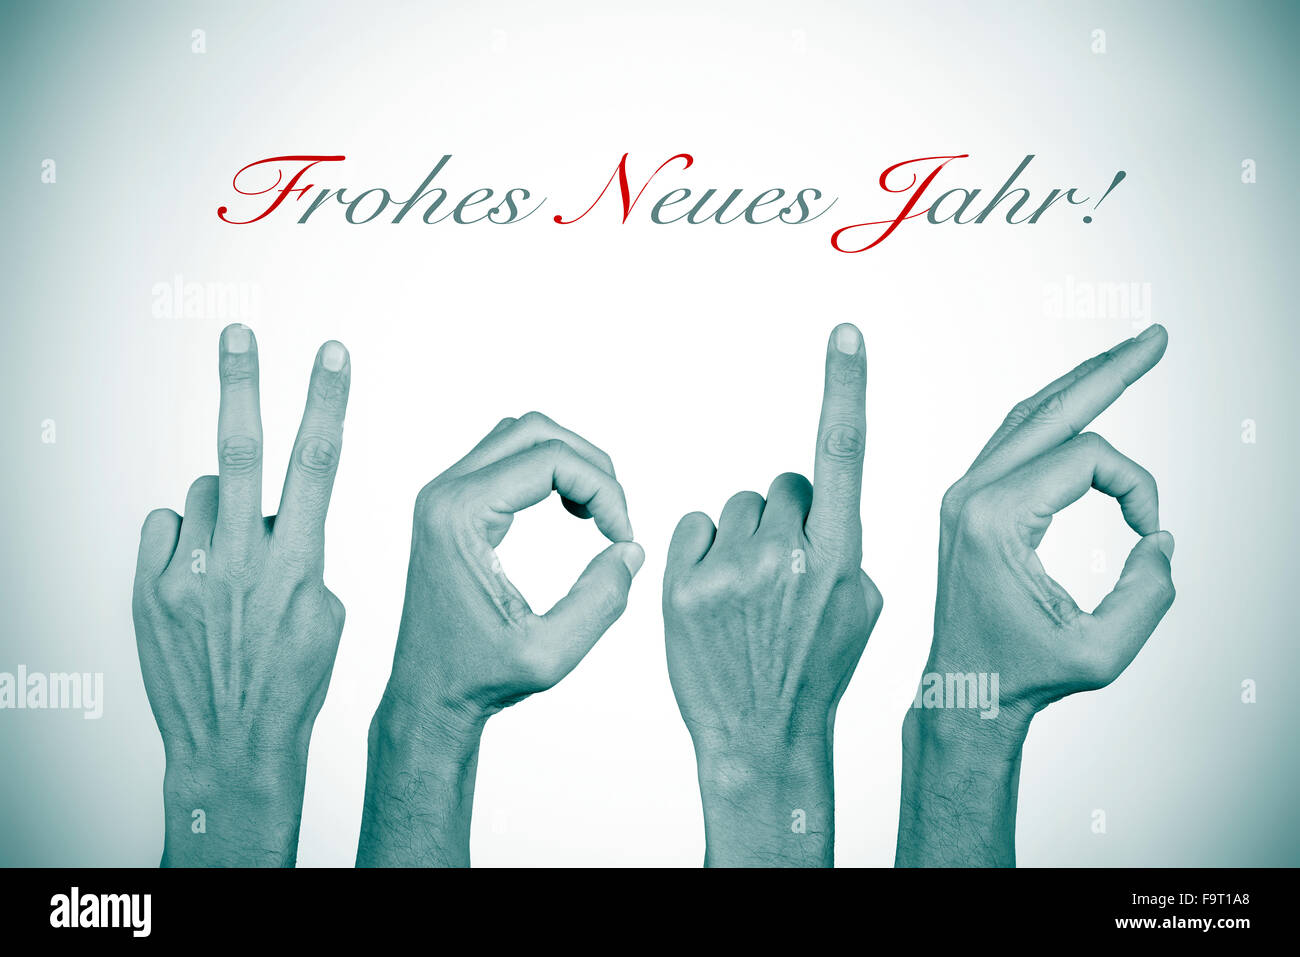 man hands forming the number 2016, as the new year, and the text frohes neues jahr, happy new year in german, in black and white Stock Photo